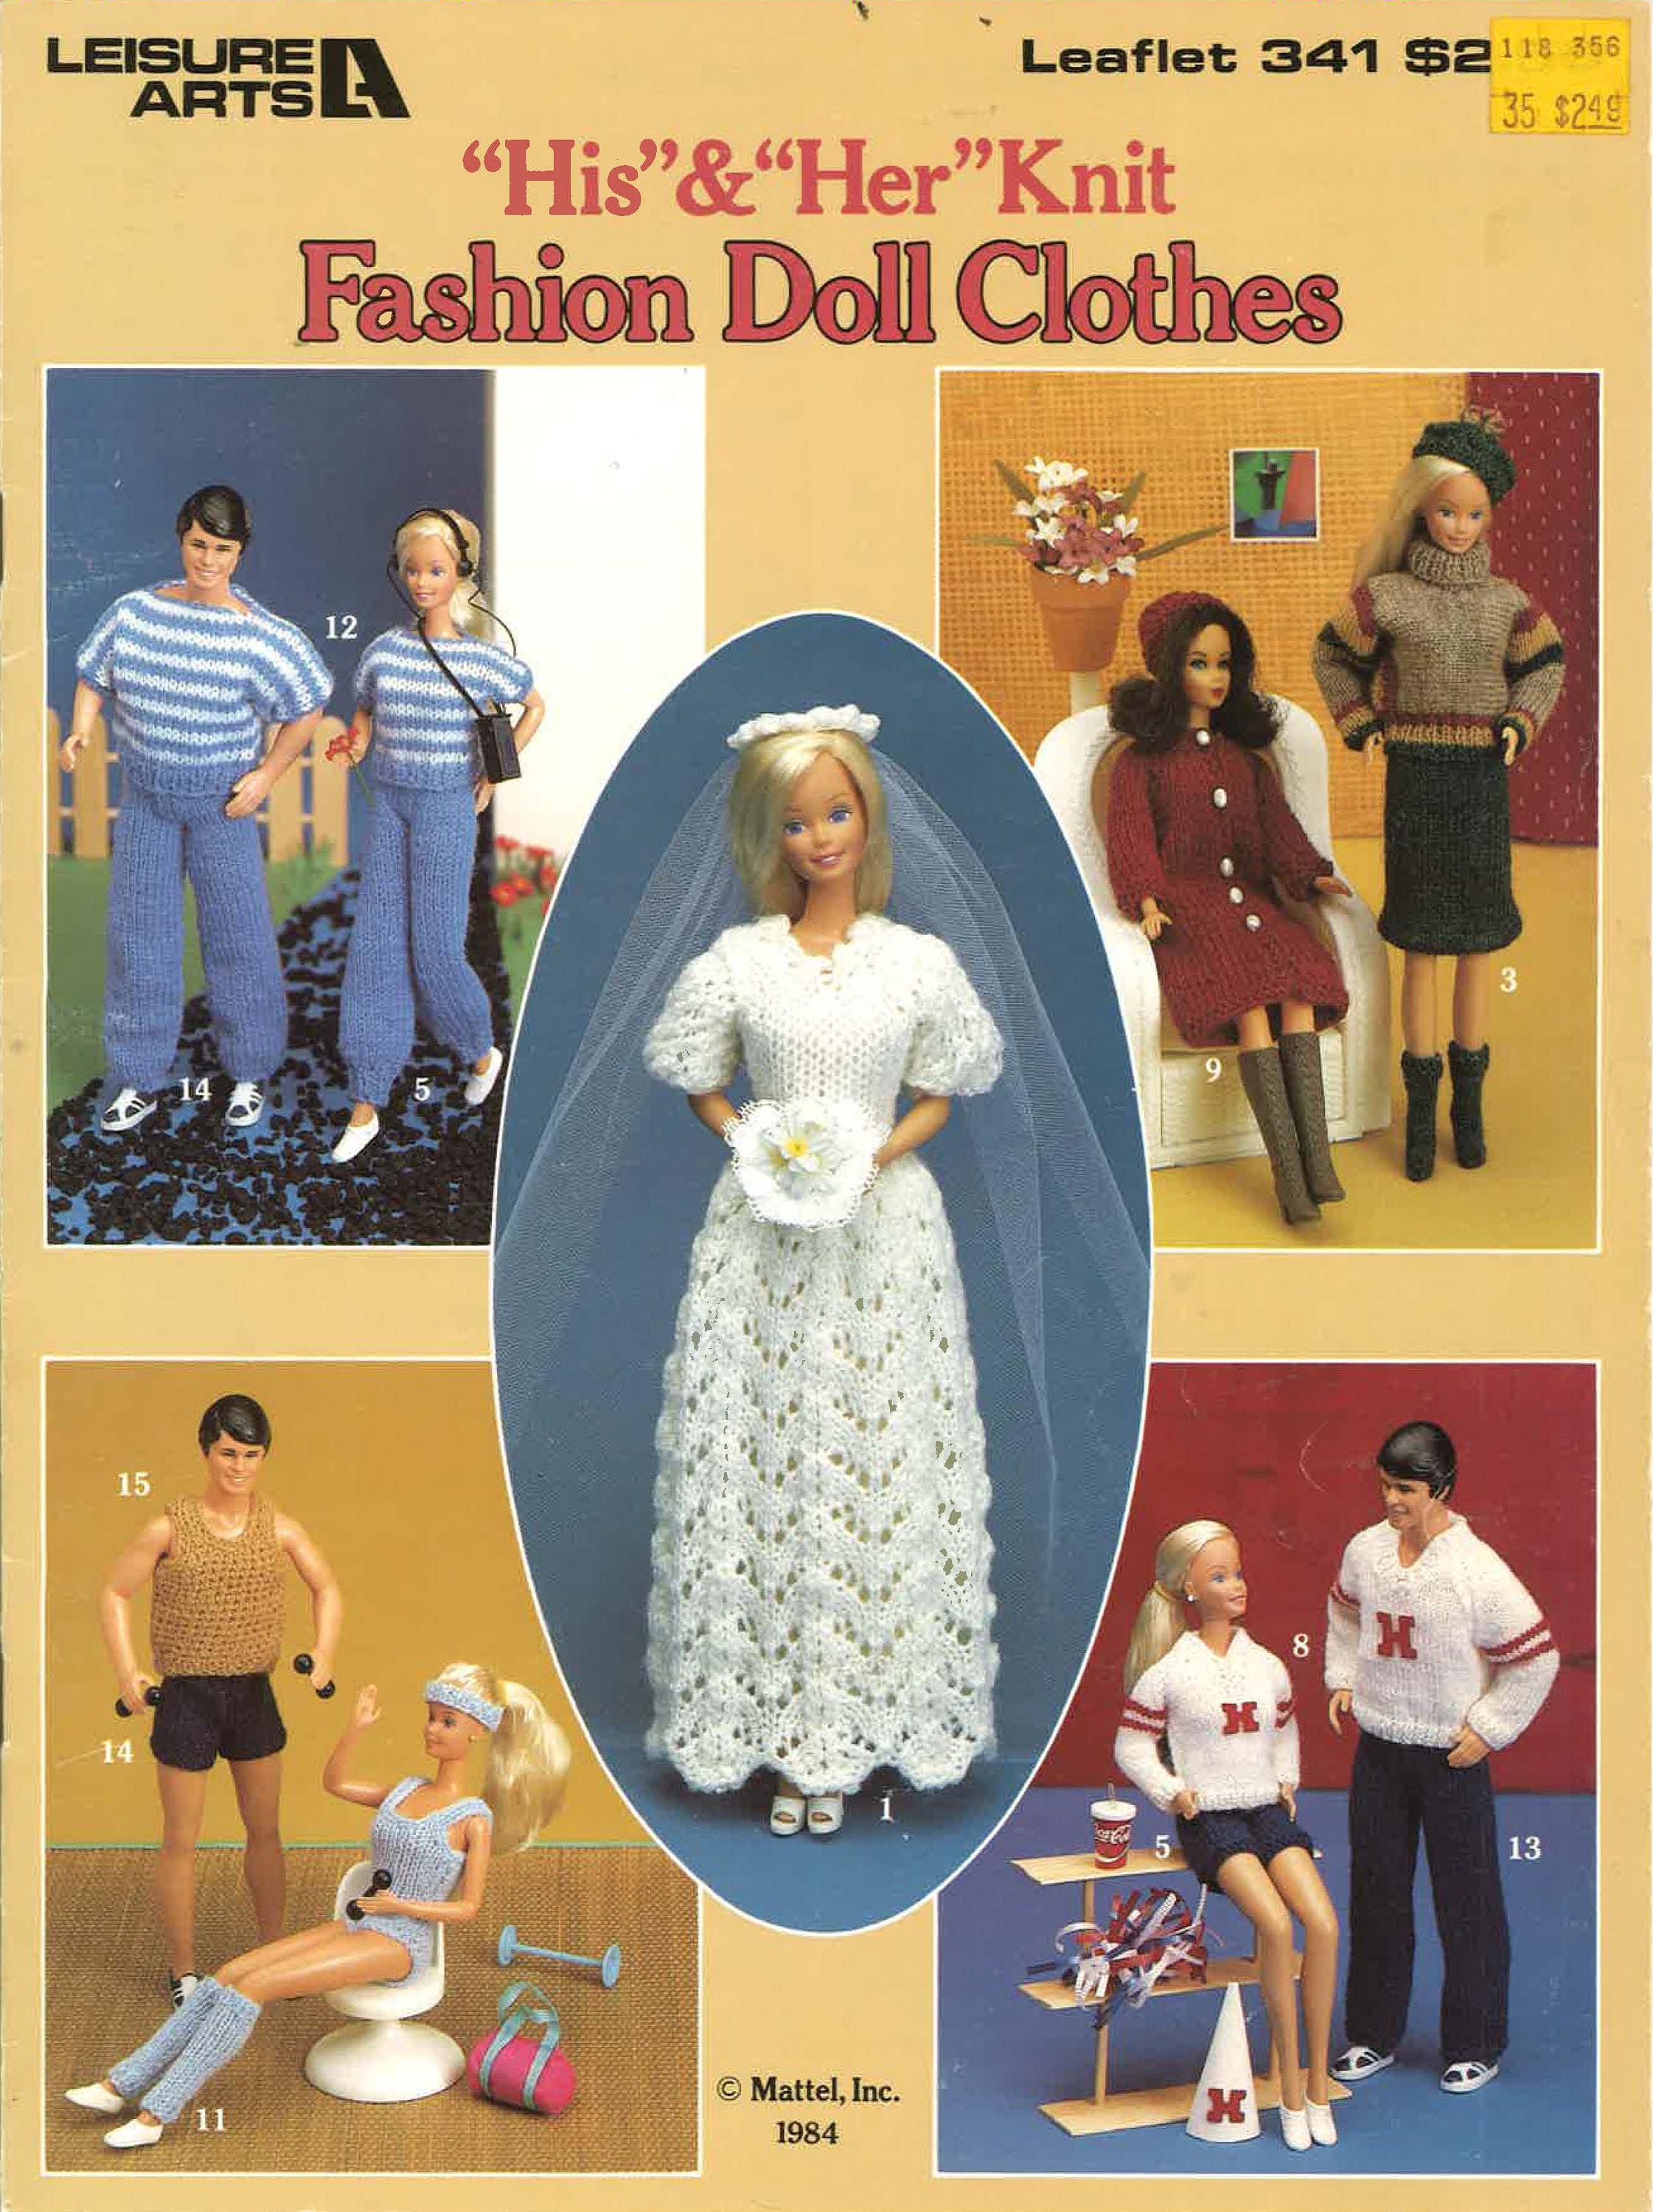 264 Sewing Patterns for Barbie, Skipper and Other Fashion Dolls on